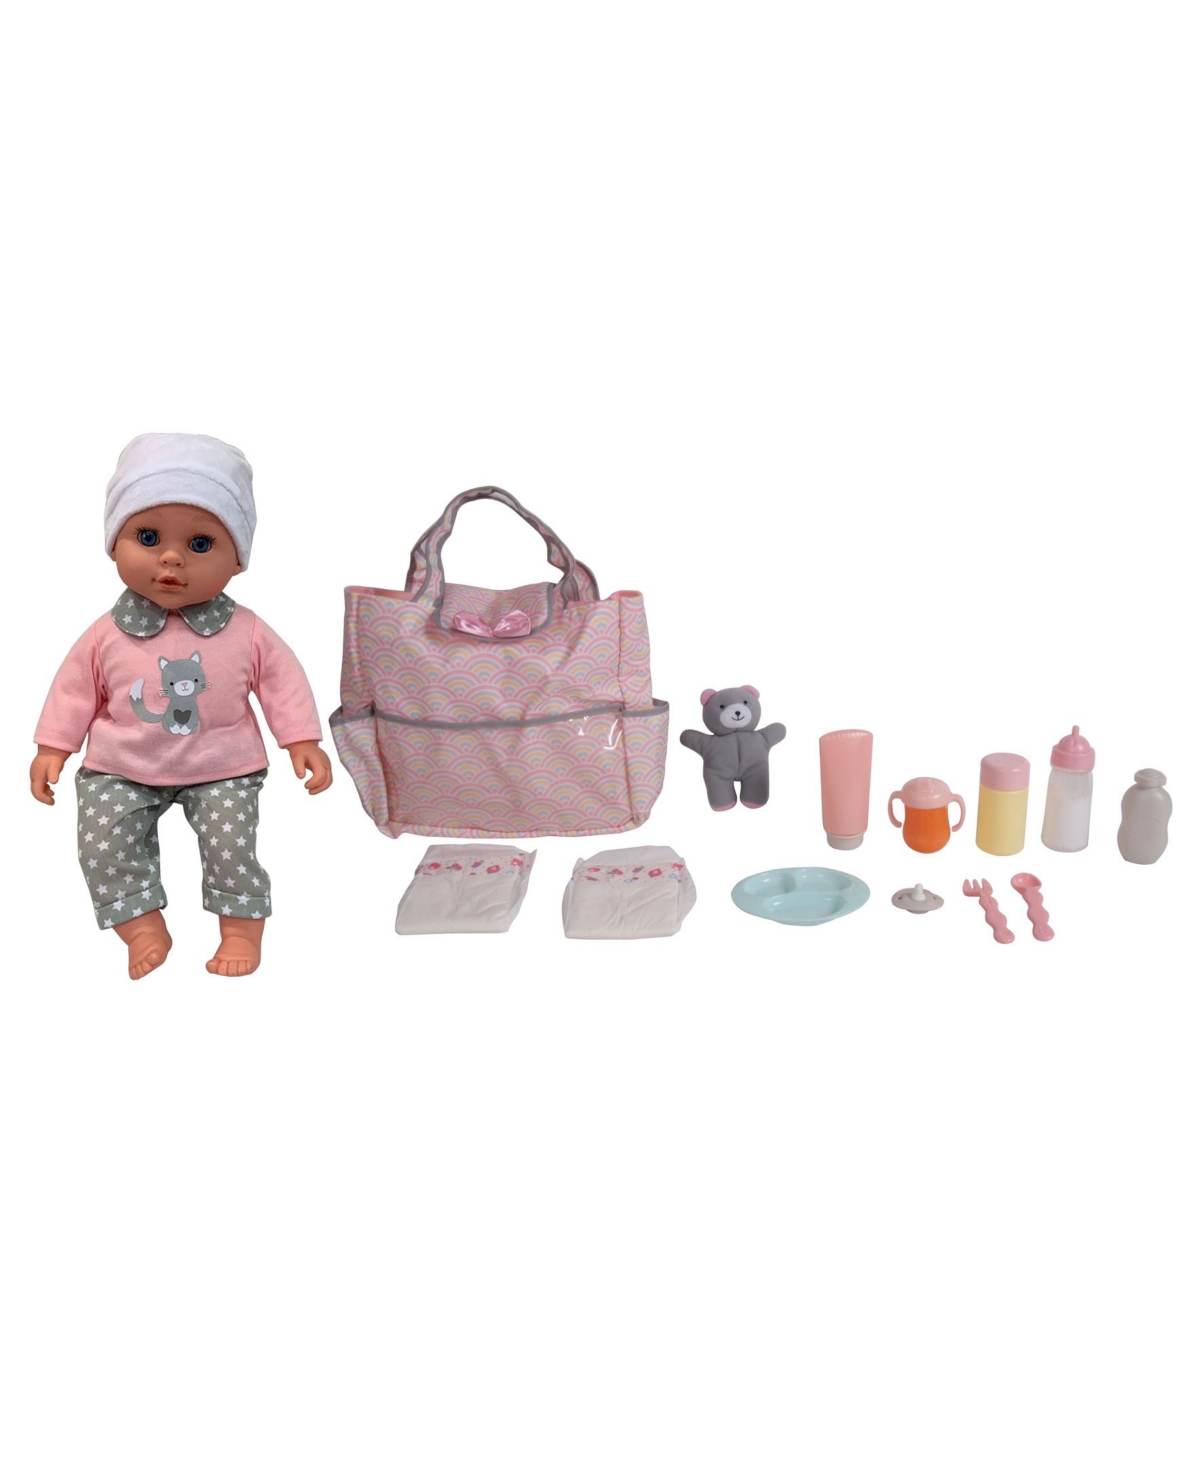 Redbox Dream Collection 16" Pretend Play Baby Doll With Diaper Bag Accessories Set In Multi